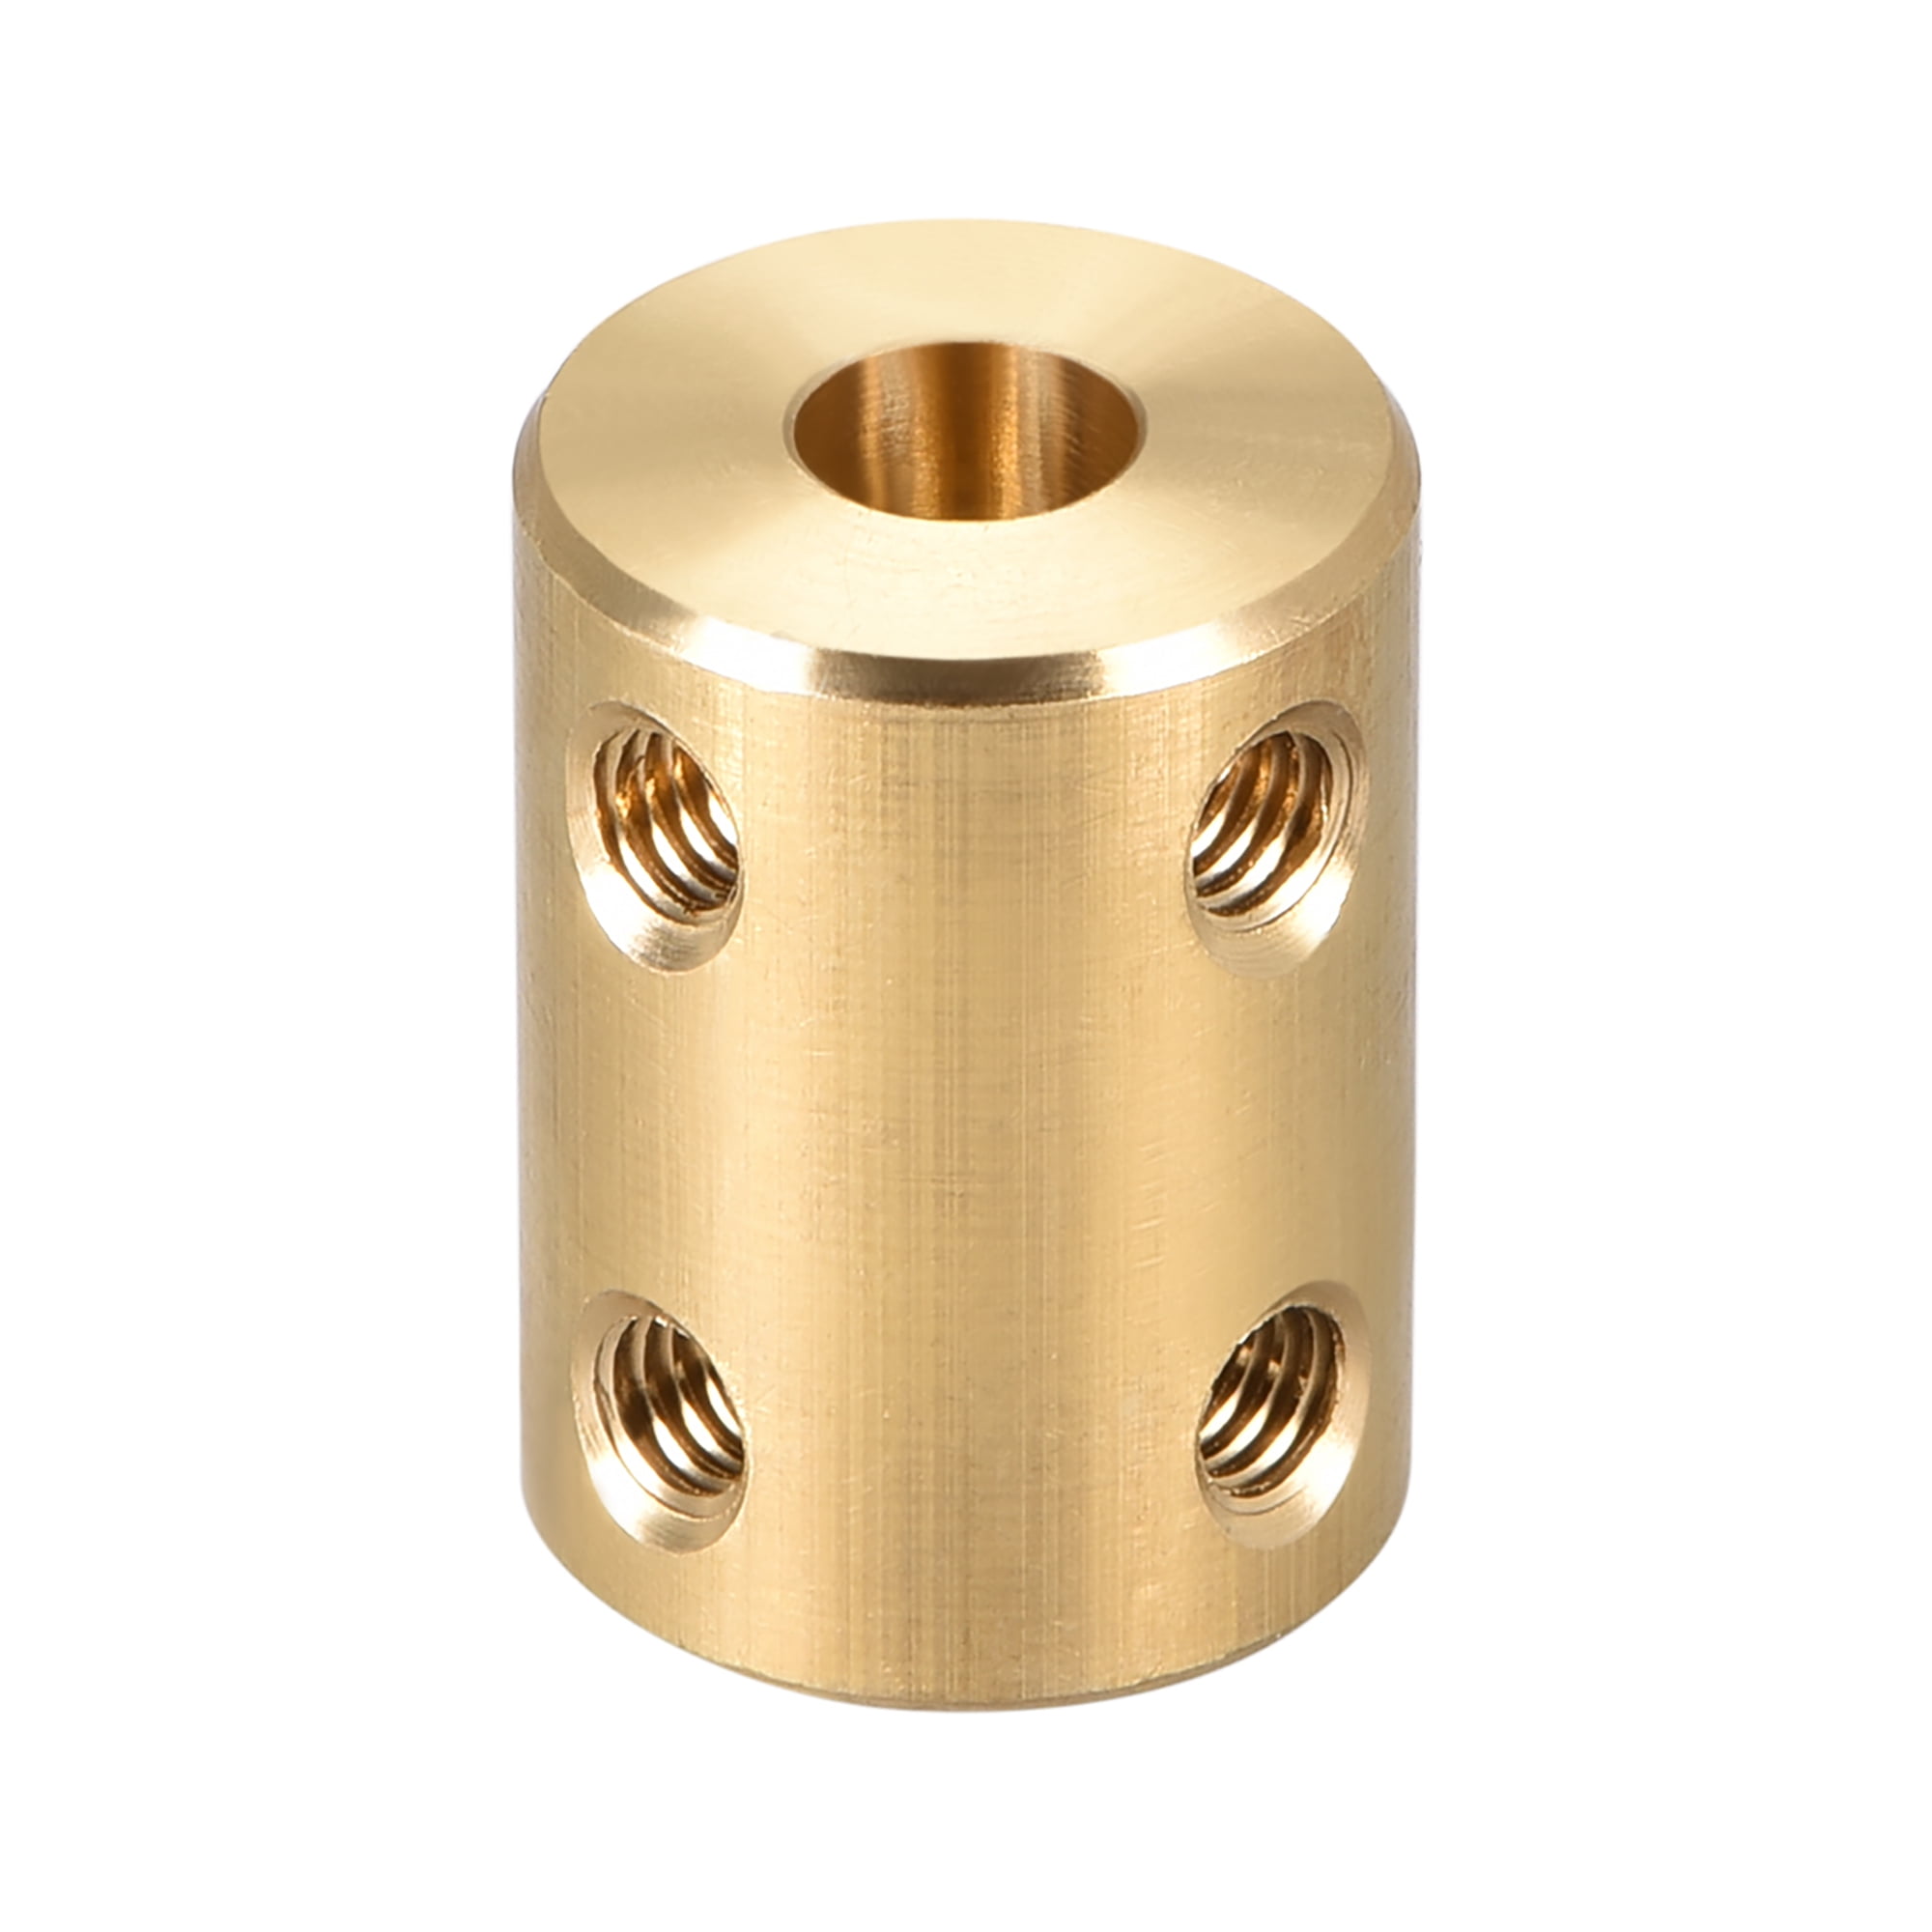 Coupling Shaft 6 mm to 10 mm Inside Diameter L22xD16 Robot Motor Wheel Rigid Coupler Connector Gold Tone 2 Pieces